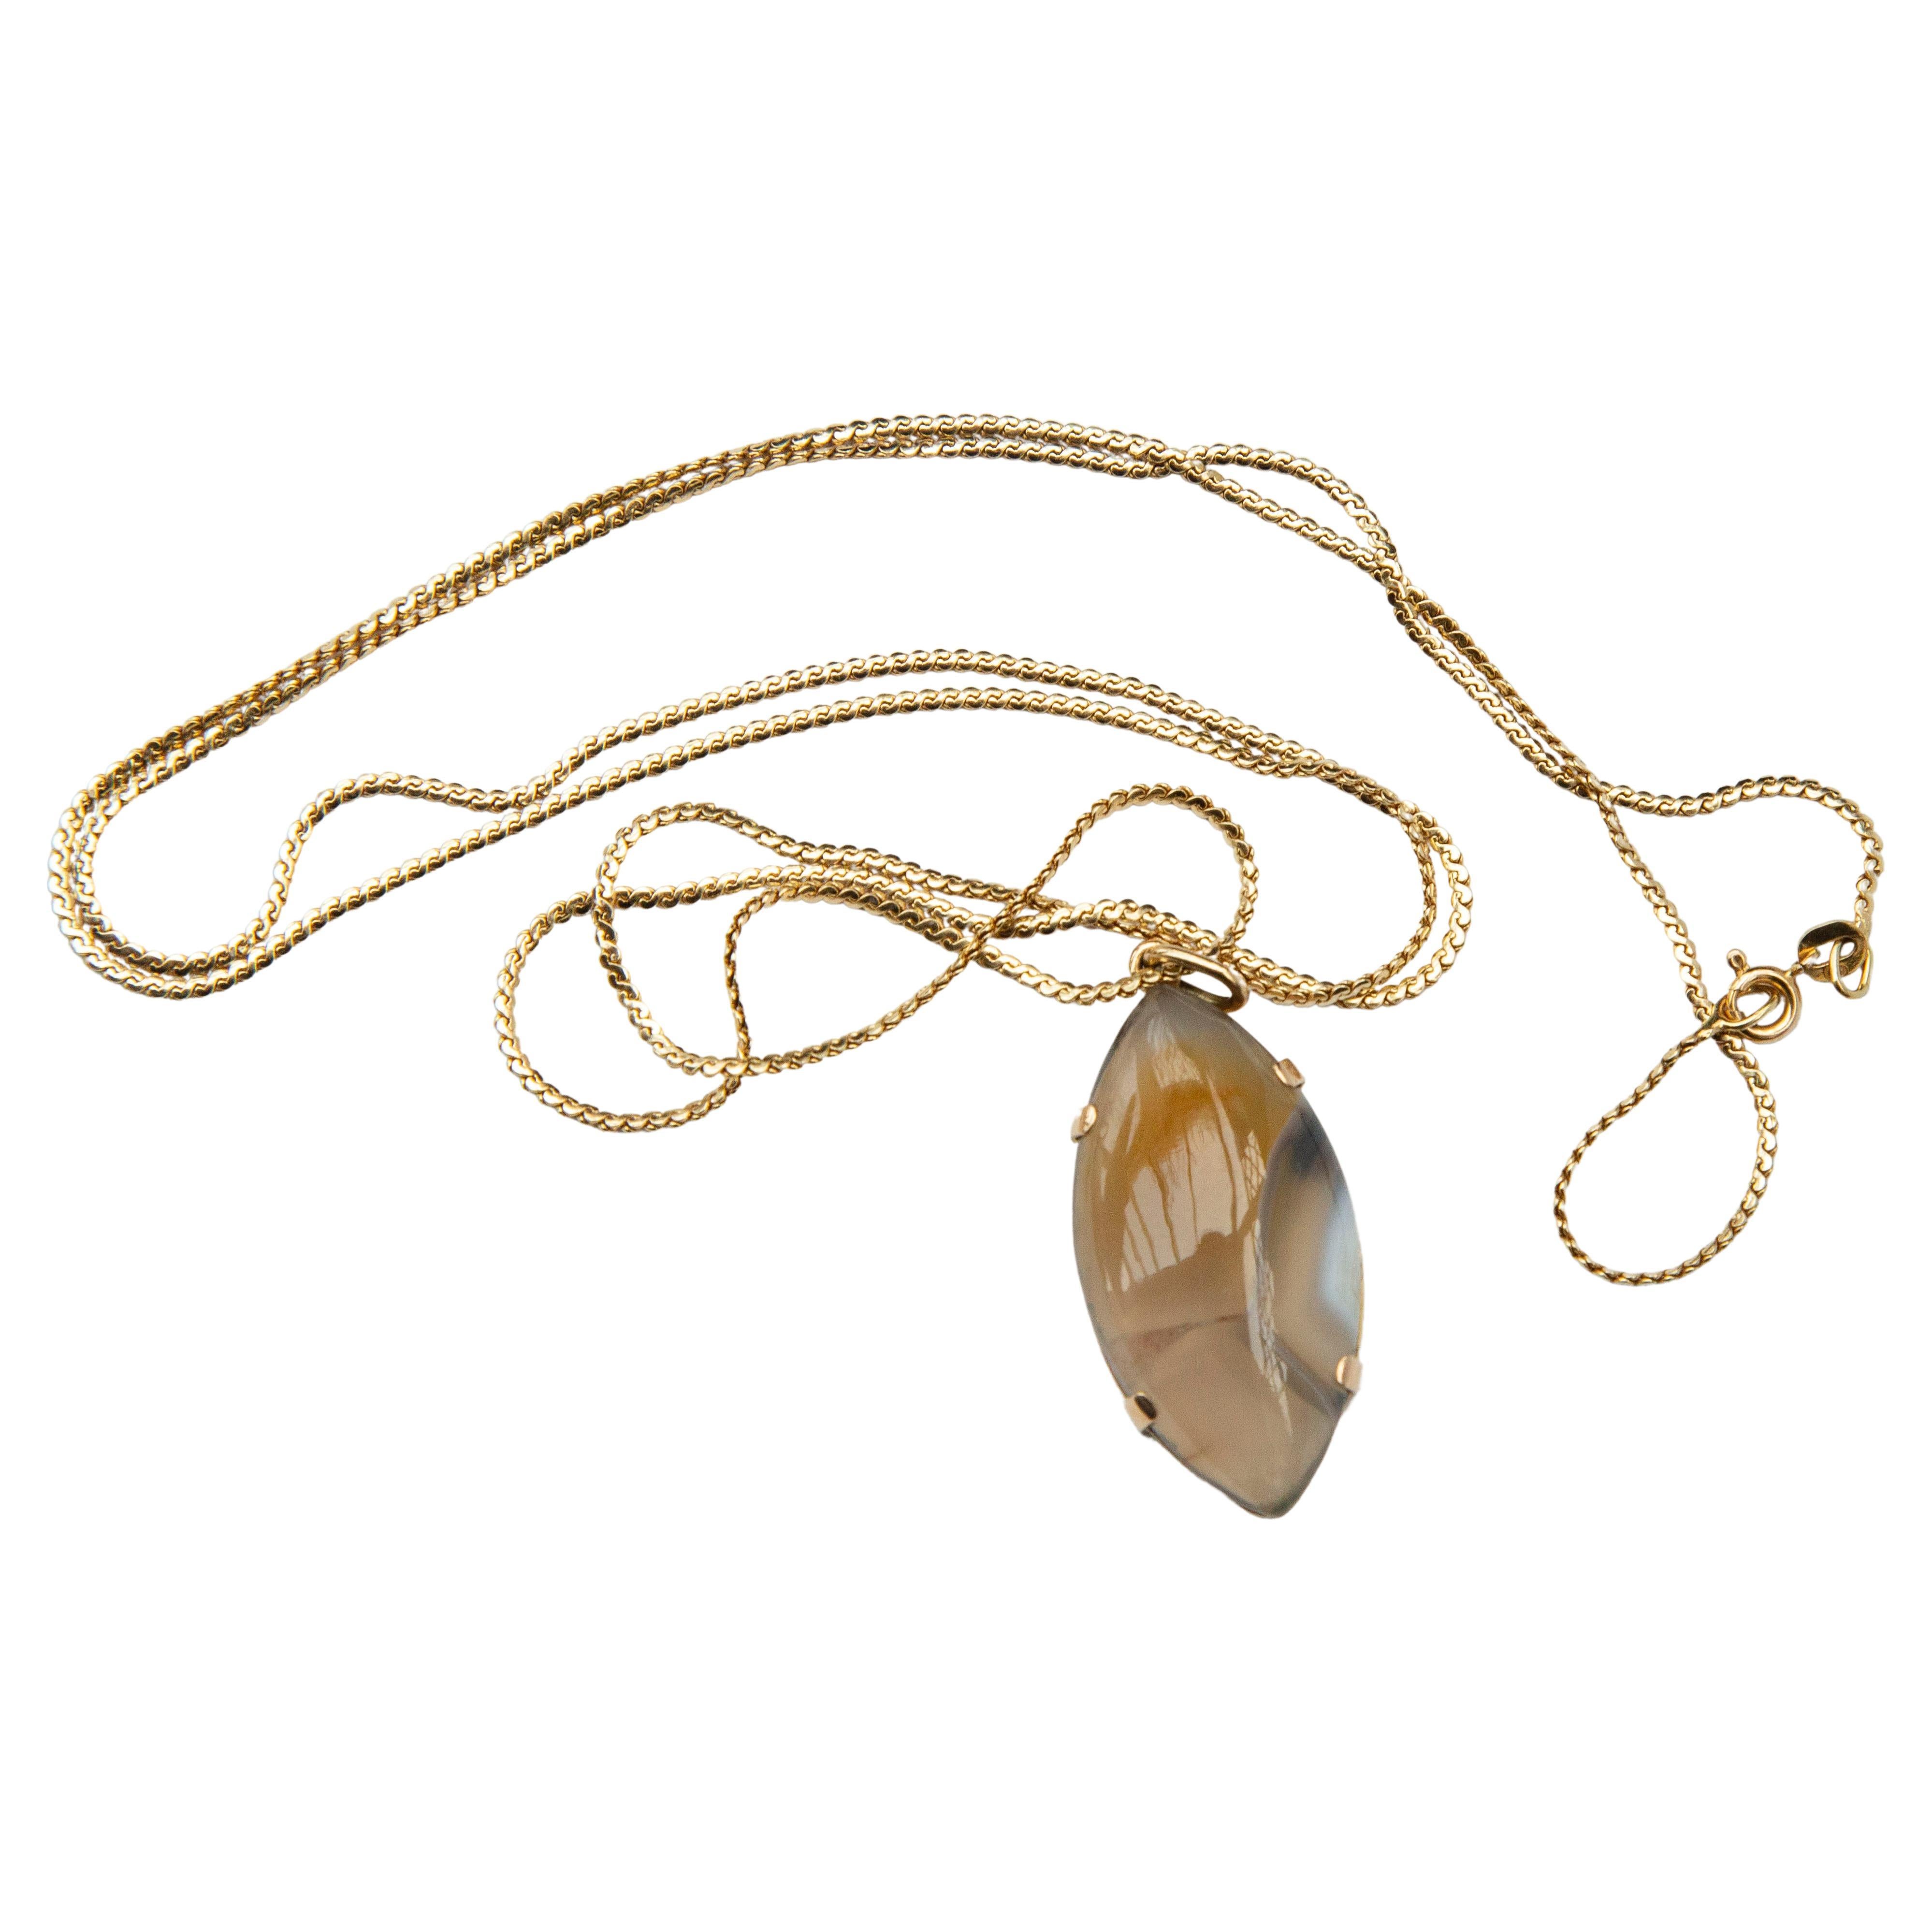 14 Karat Gold Necklace Chain with an Agate Pendant in 14 Karat Gold Setting For Sale